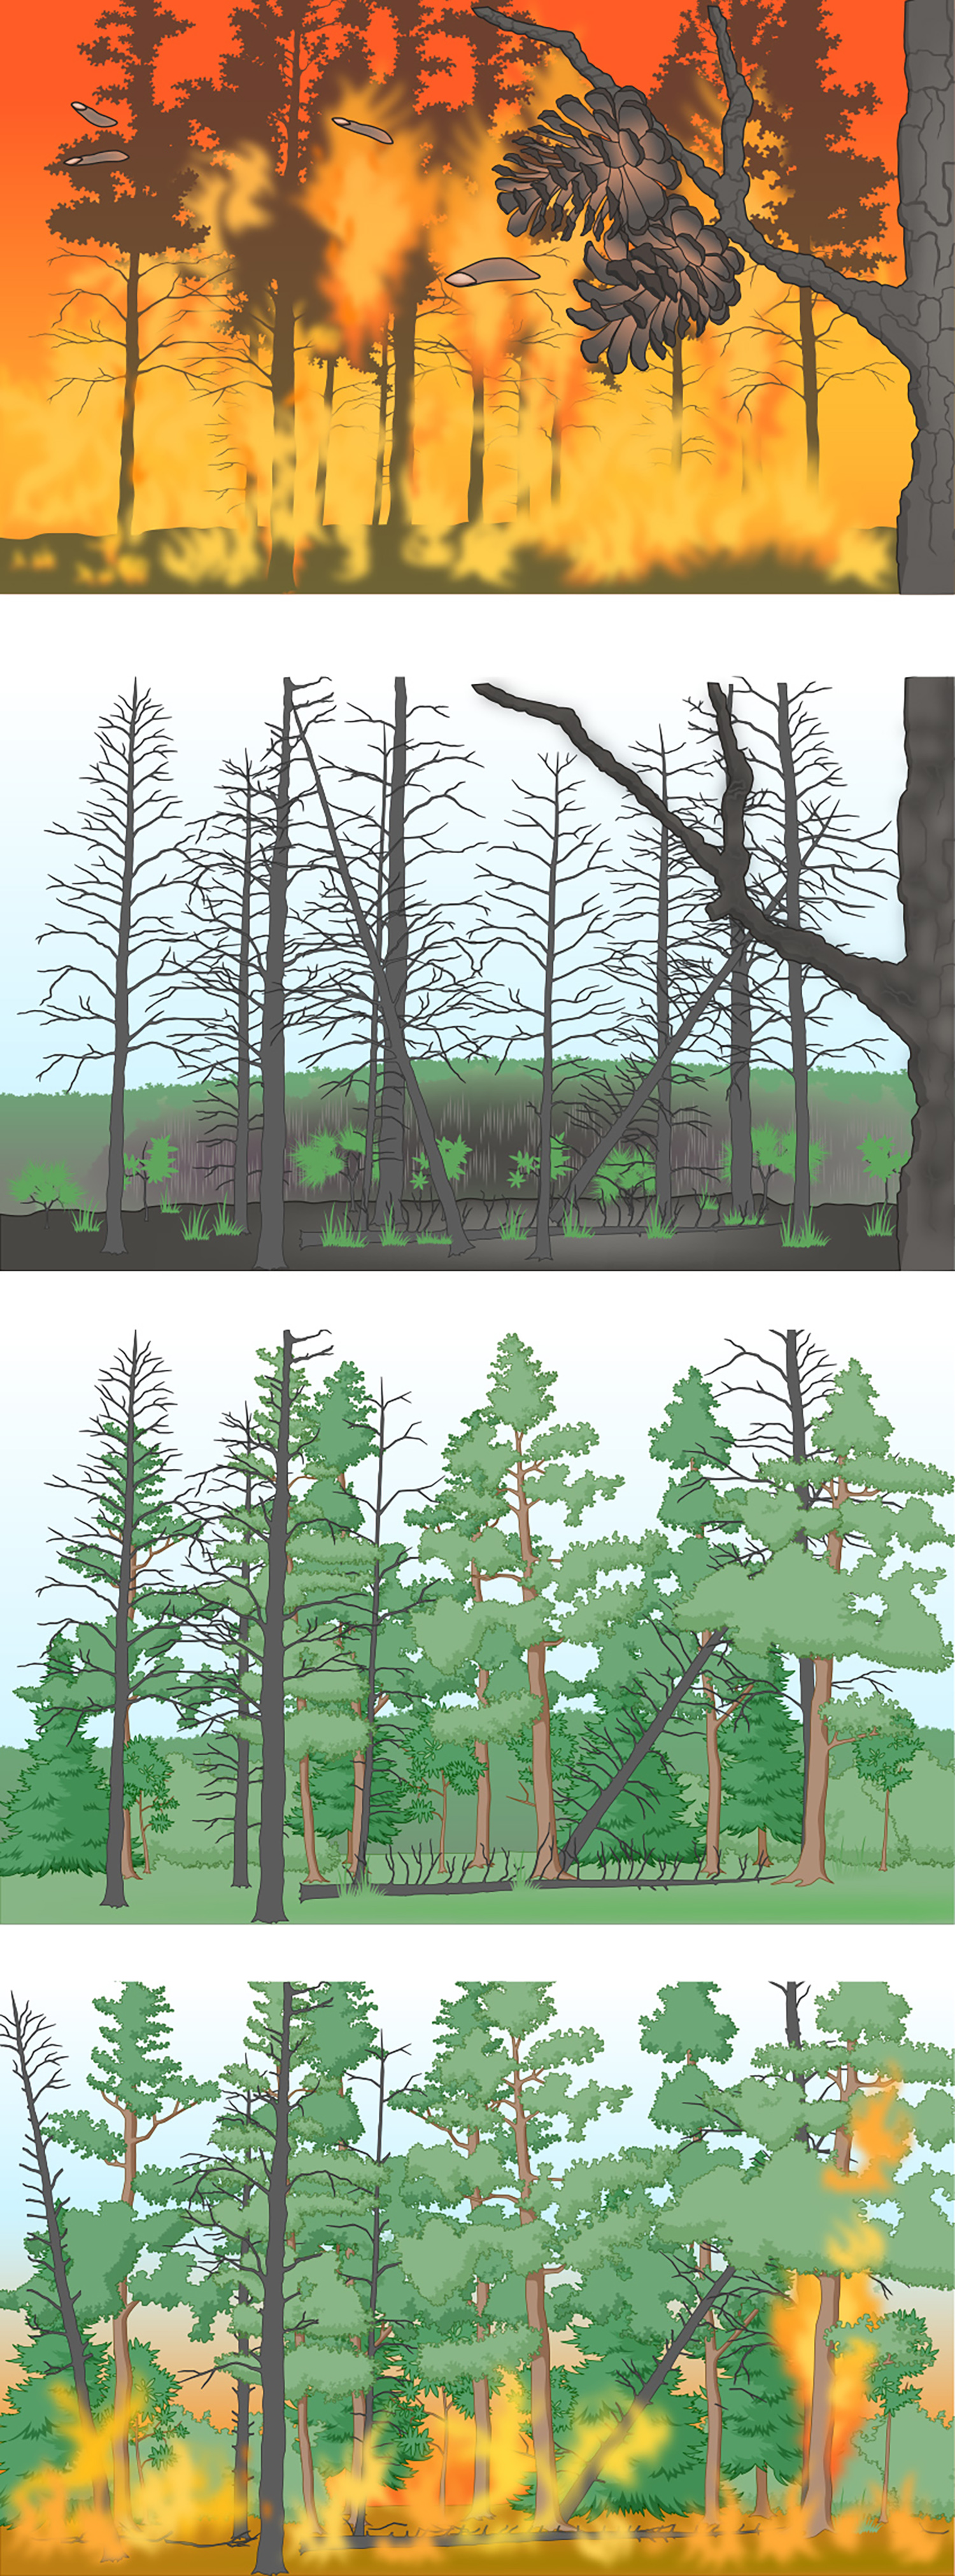 four images of a wildfire's effects on a forest